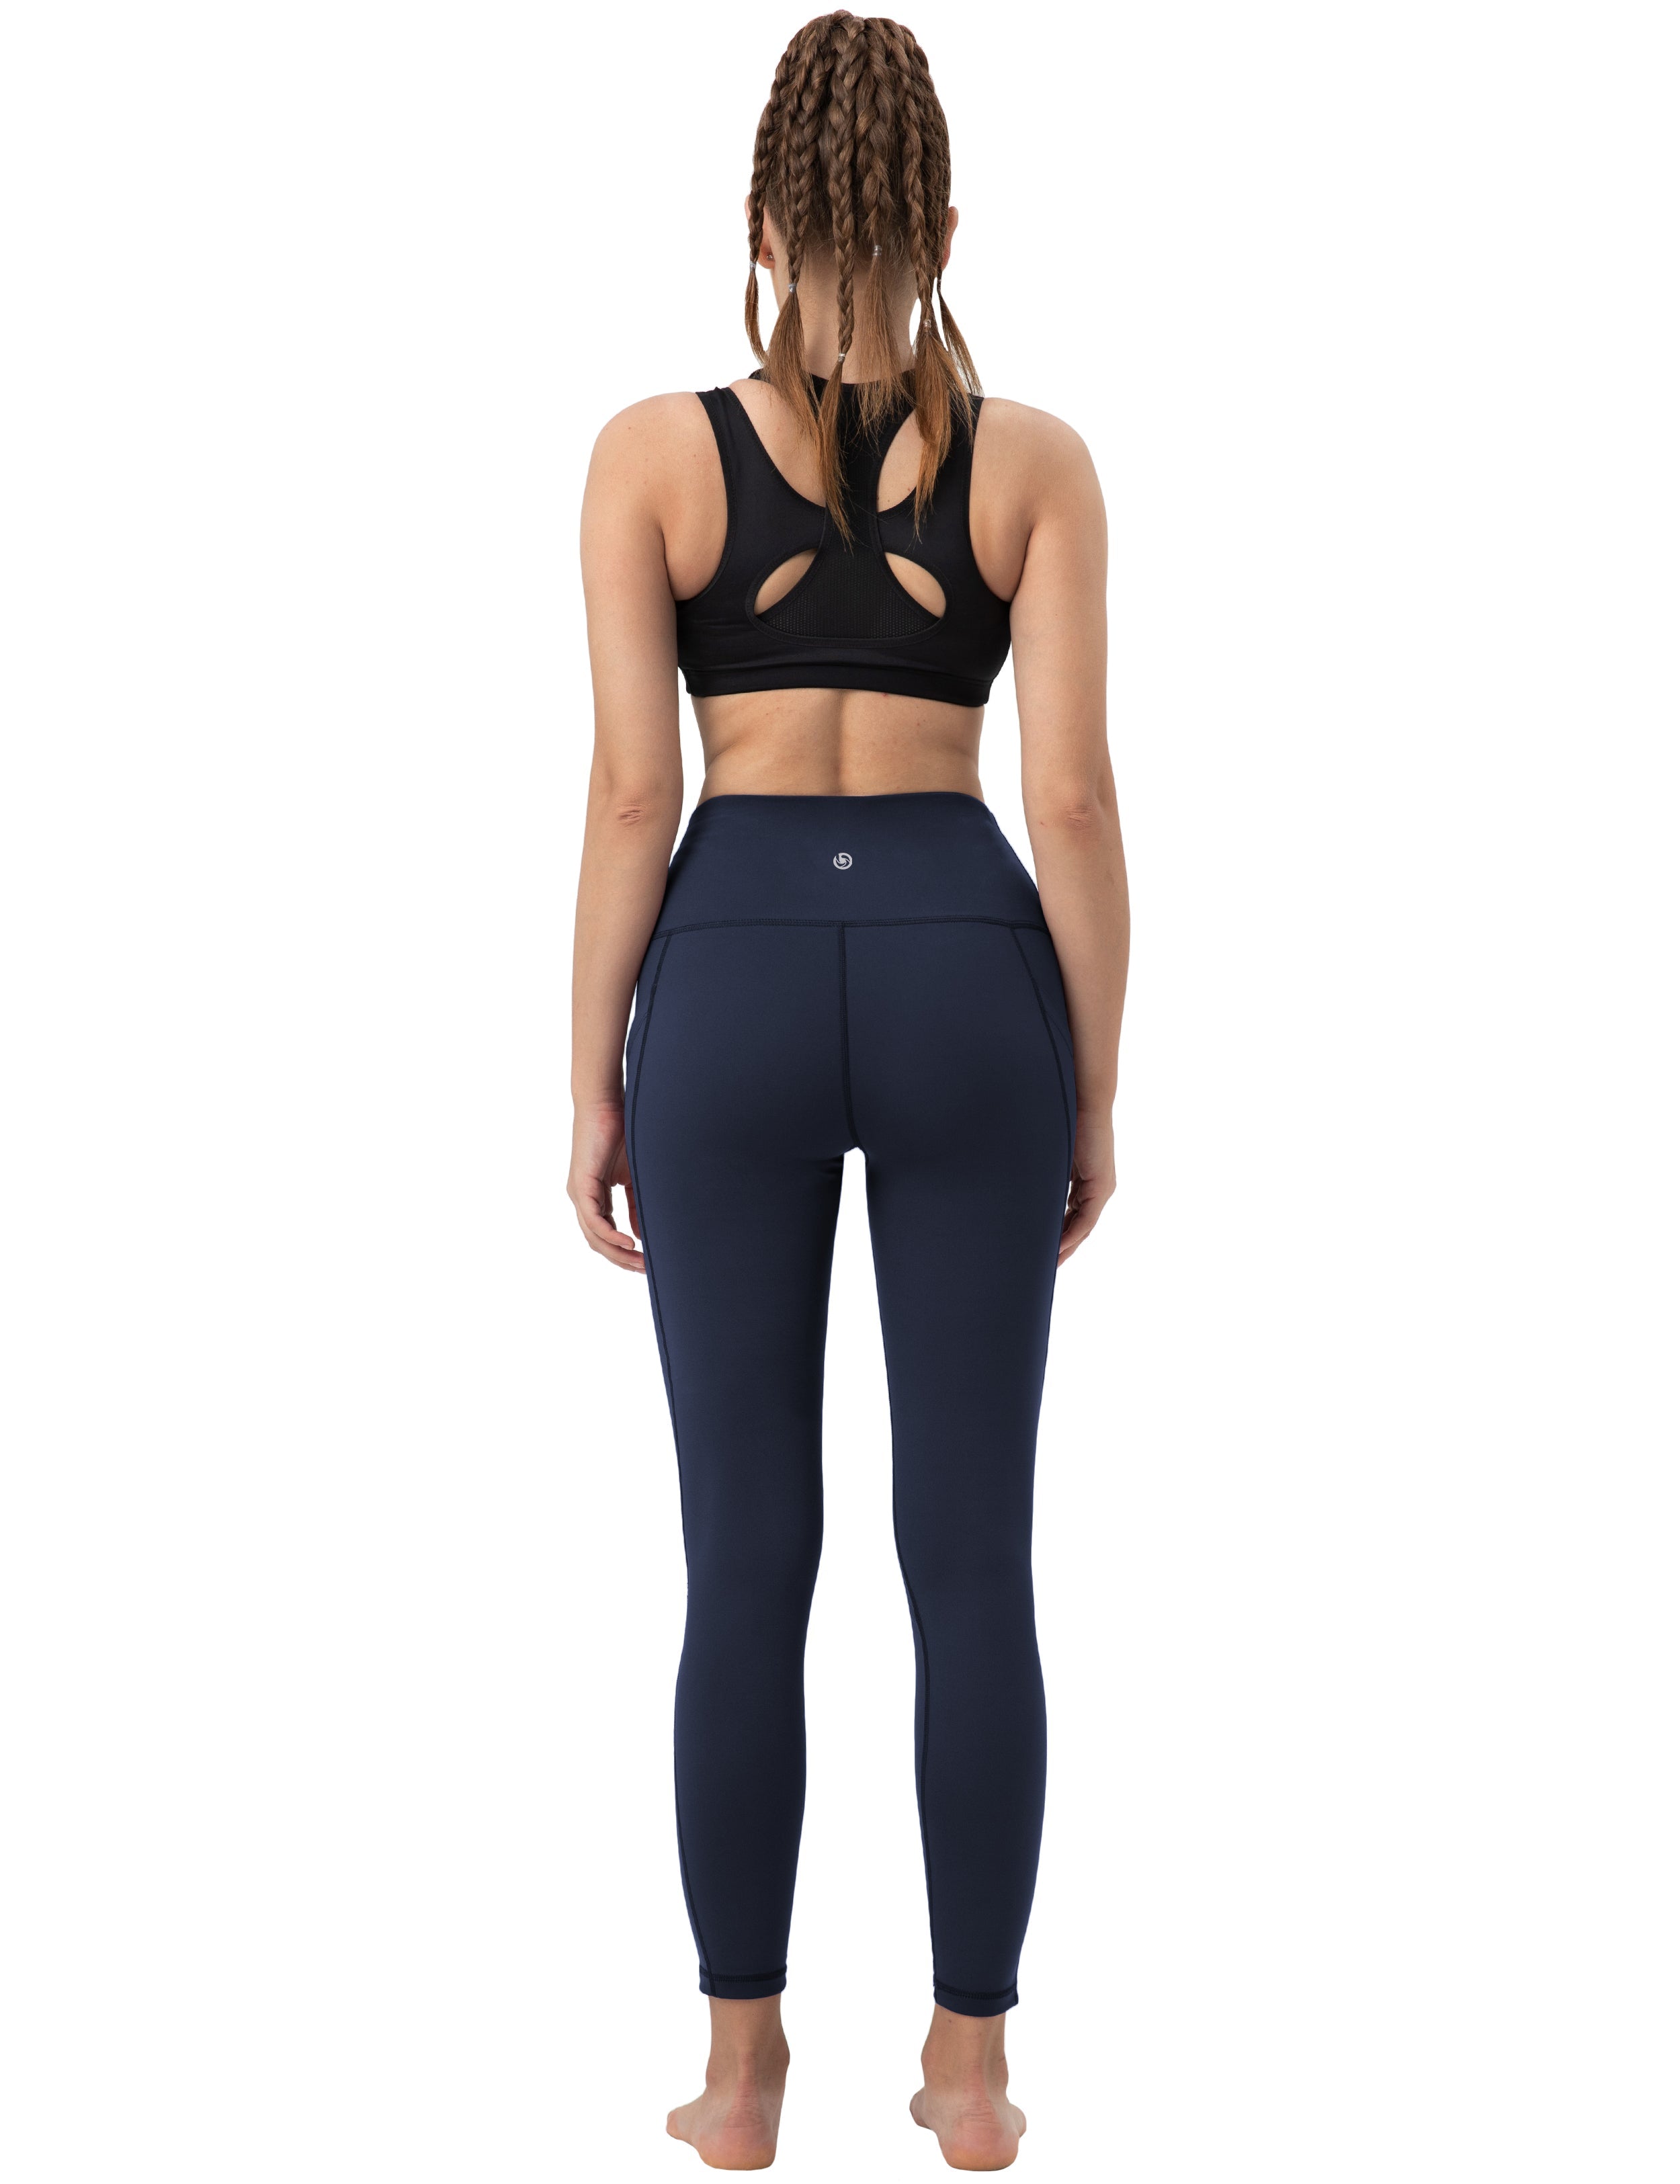 High Waist Side Pockets yogastudio Pants darknavy 75% Nylon, 25% Spandex Fabric doesn't attract lint easily 4-way stretch No see-through Moisture-wicking Tummy control Inner pocket